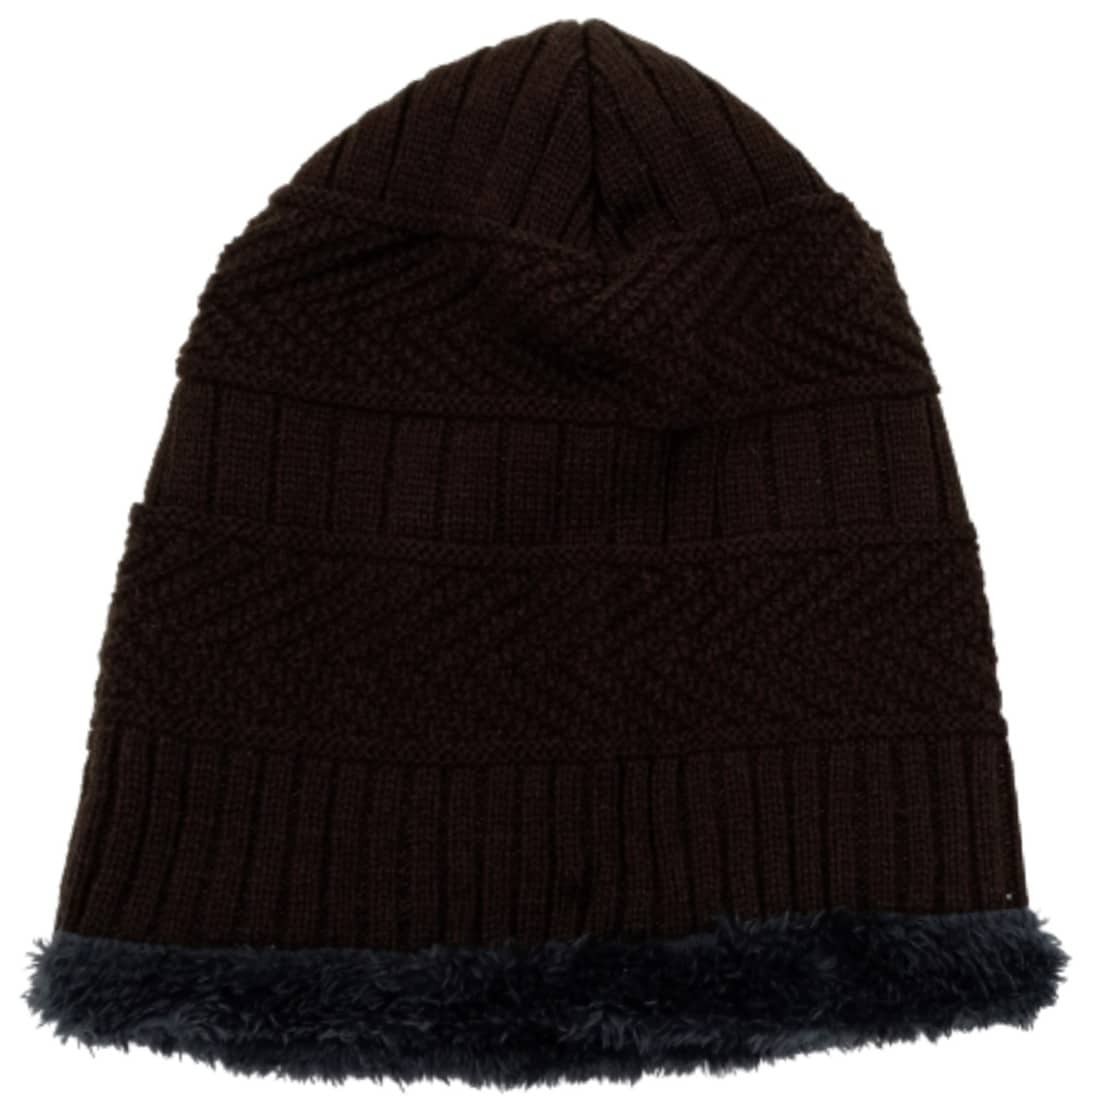 Triple Layered Beanies With Fur and Satin Lining - Winter Caps - Hair Love India